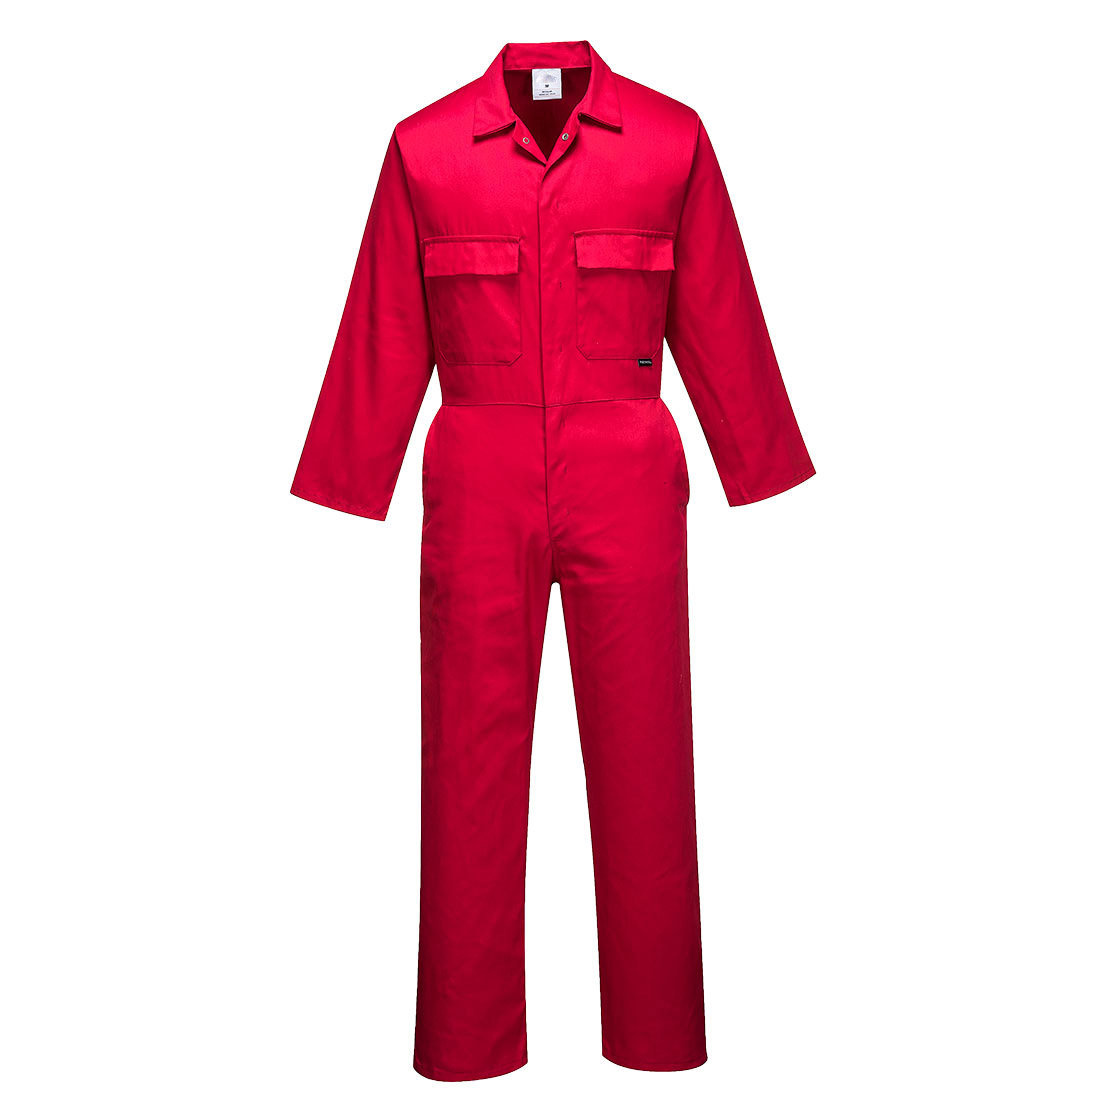  Popular Classic Strong Windproof Work Polycotton Winter Coverall 